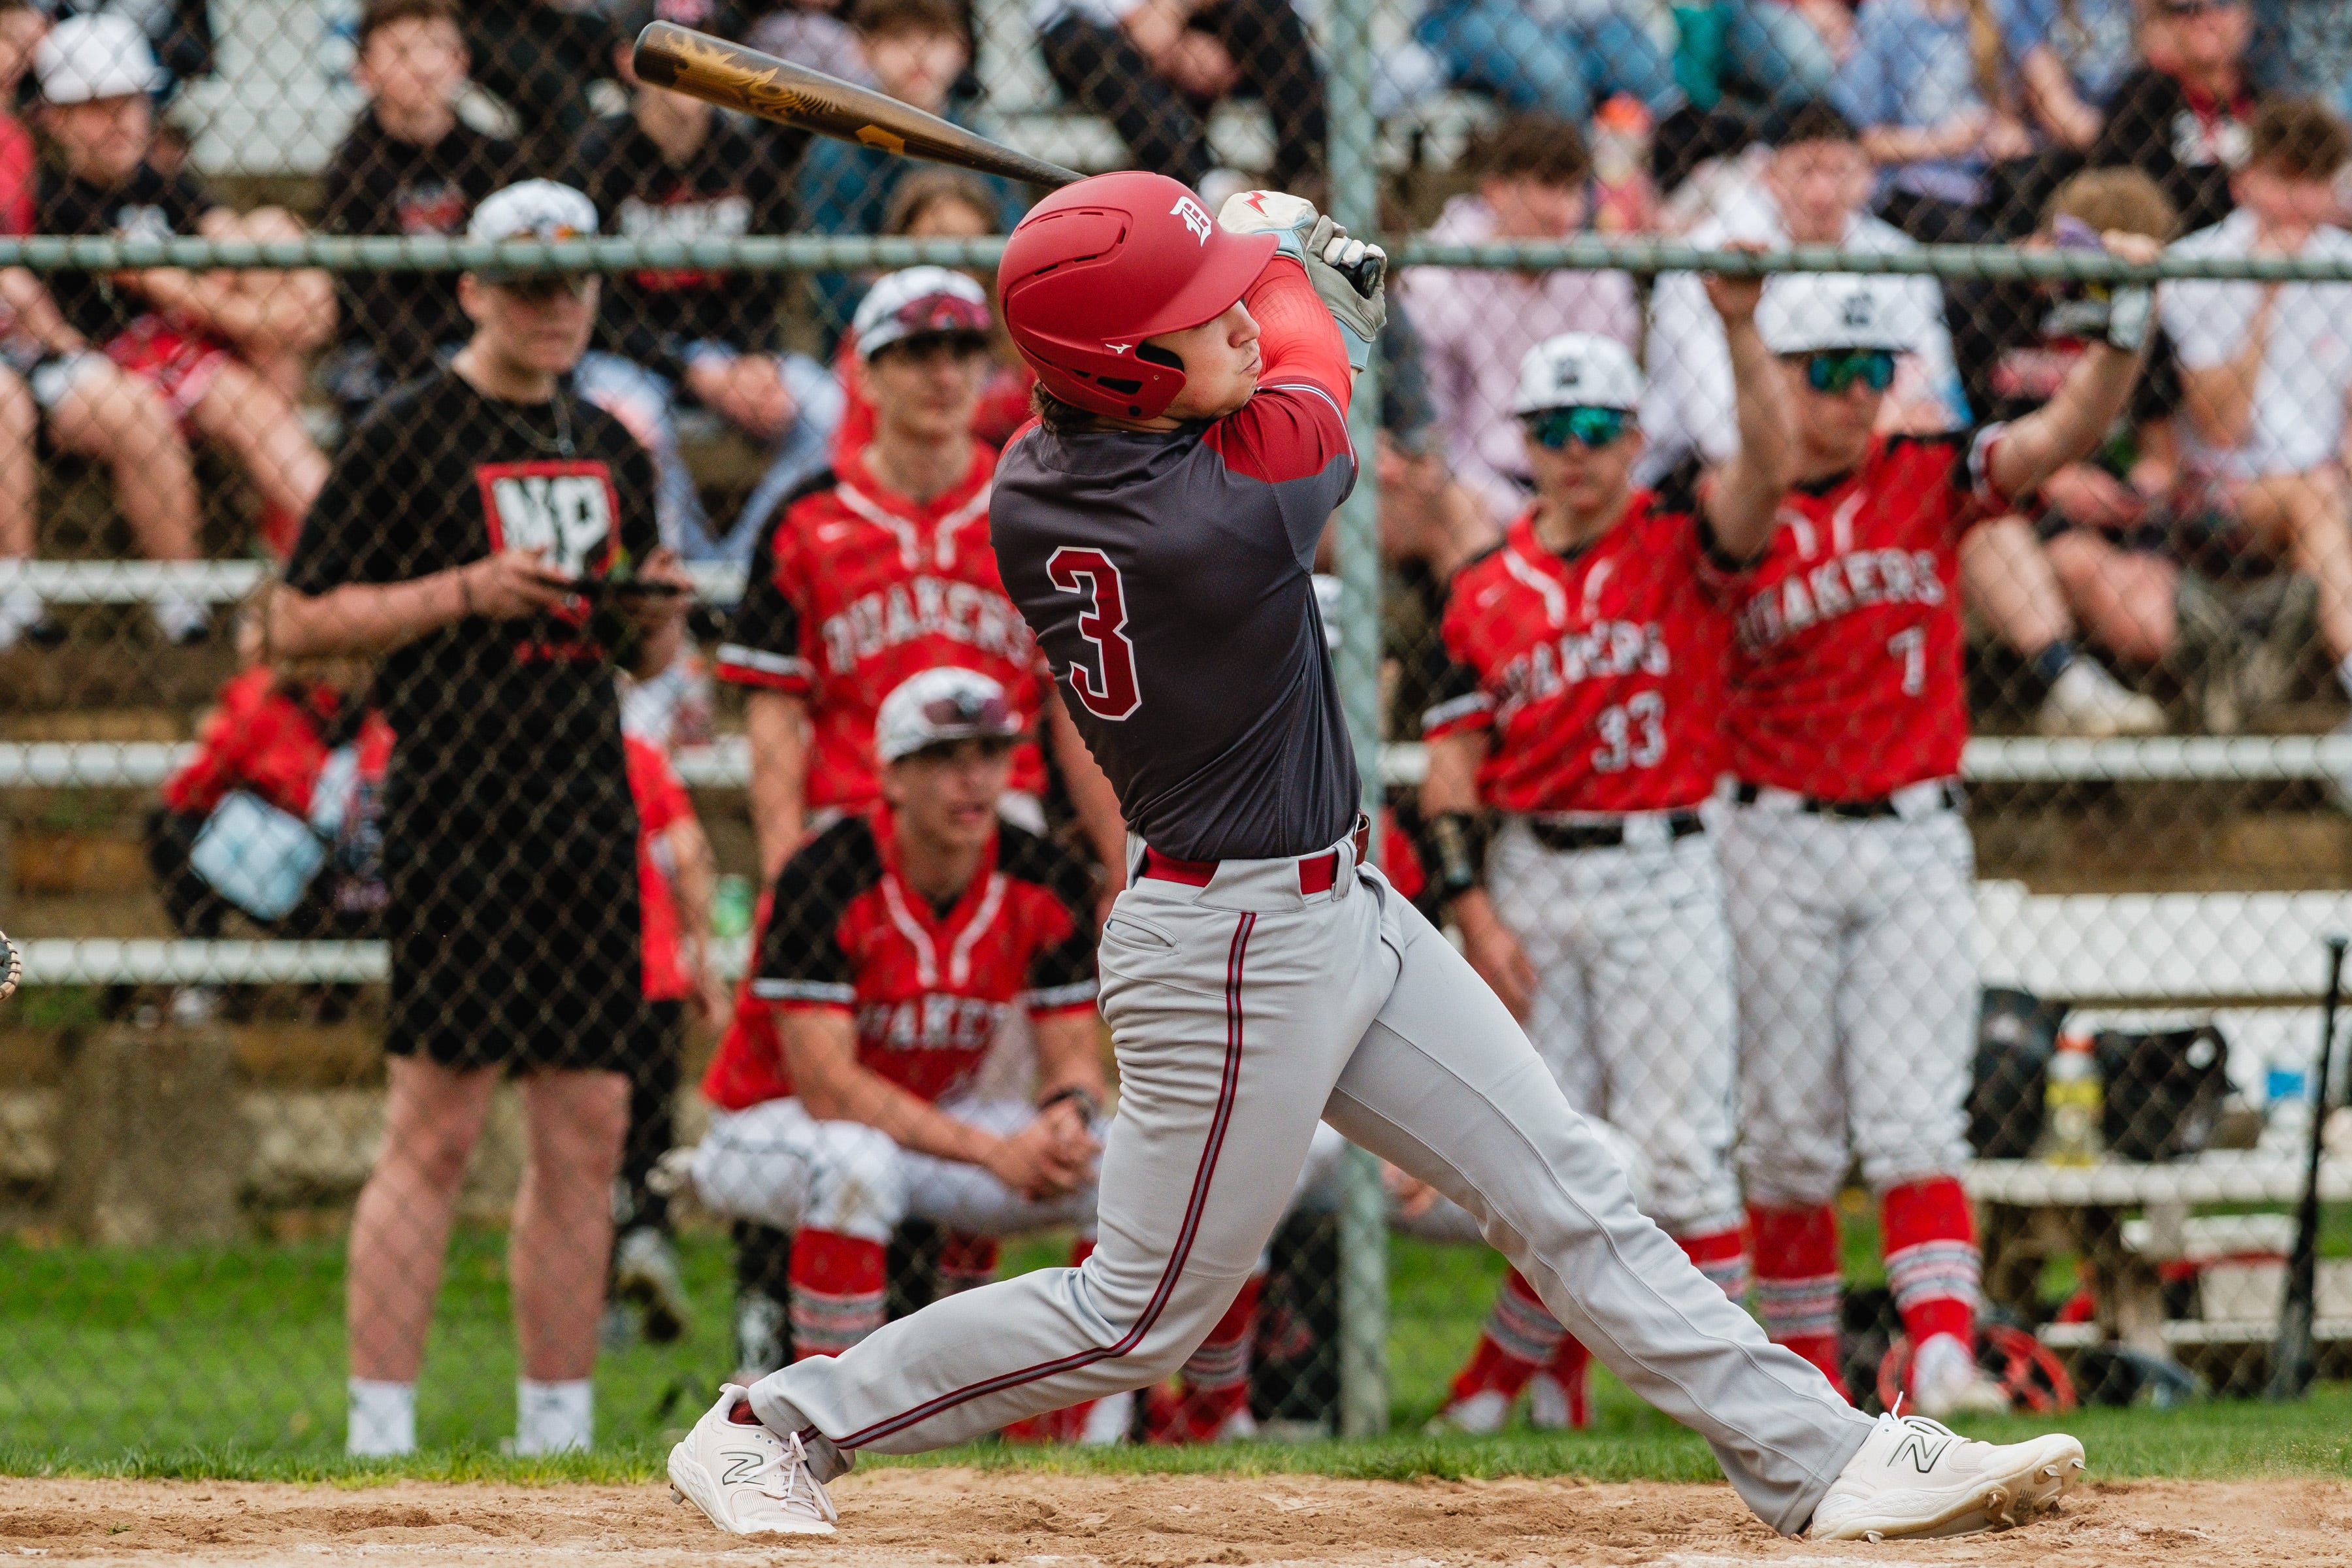 OHSAA baseball tournament draw: Here's who area teams will face